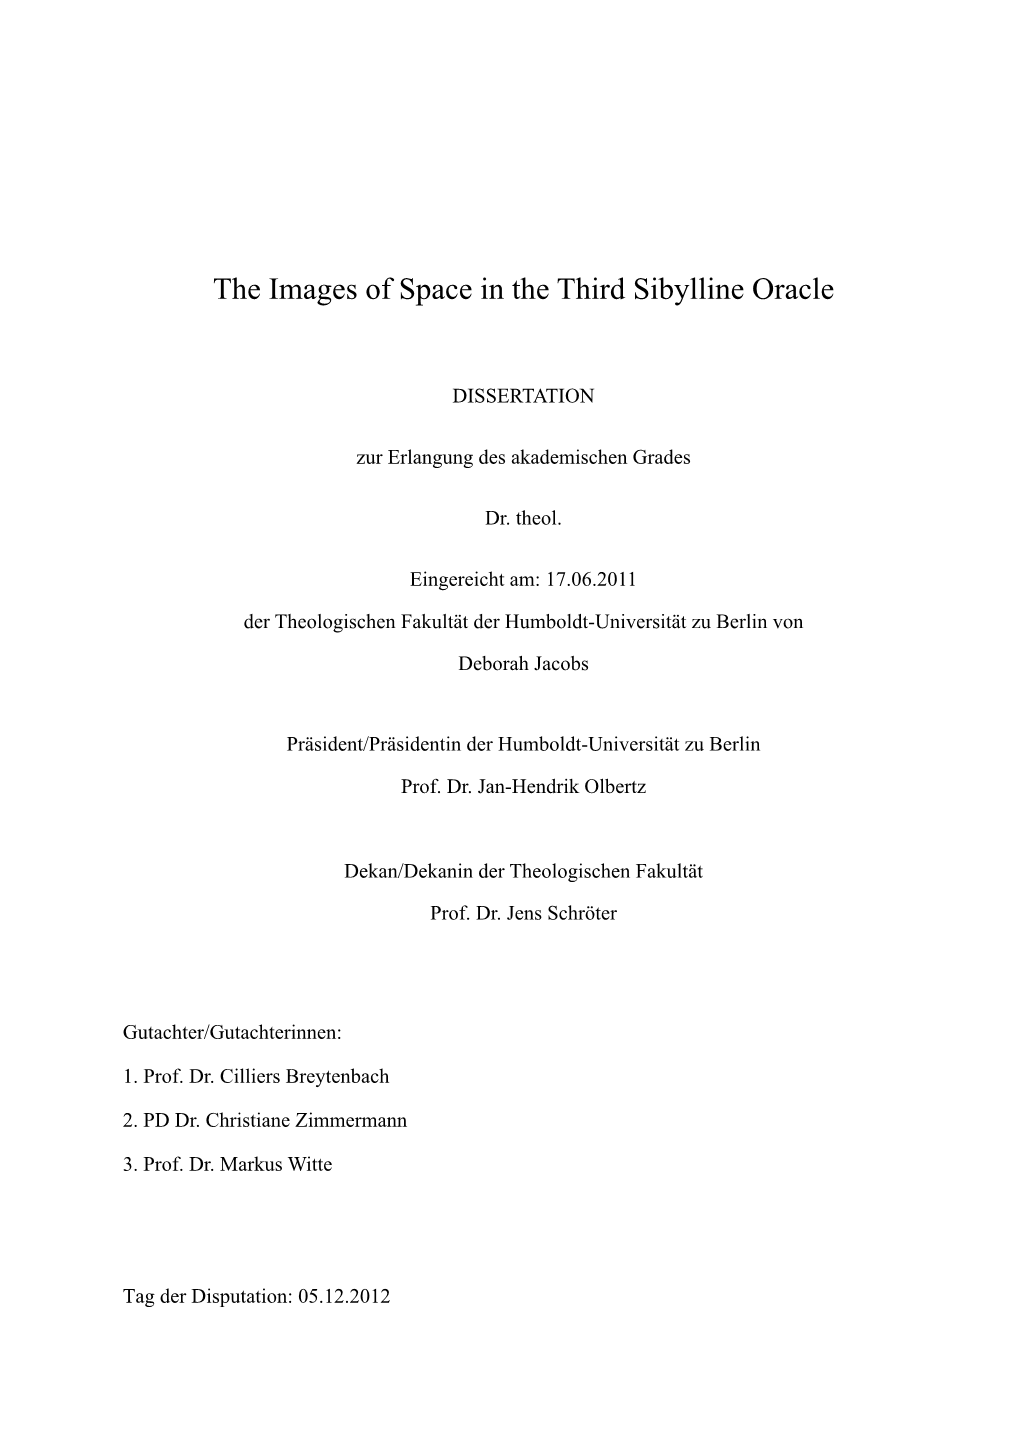 The Images of Space in the Third Sibylline Oracle